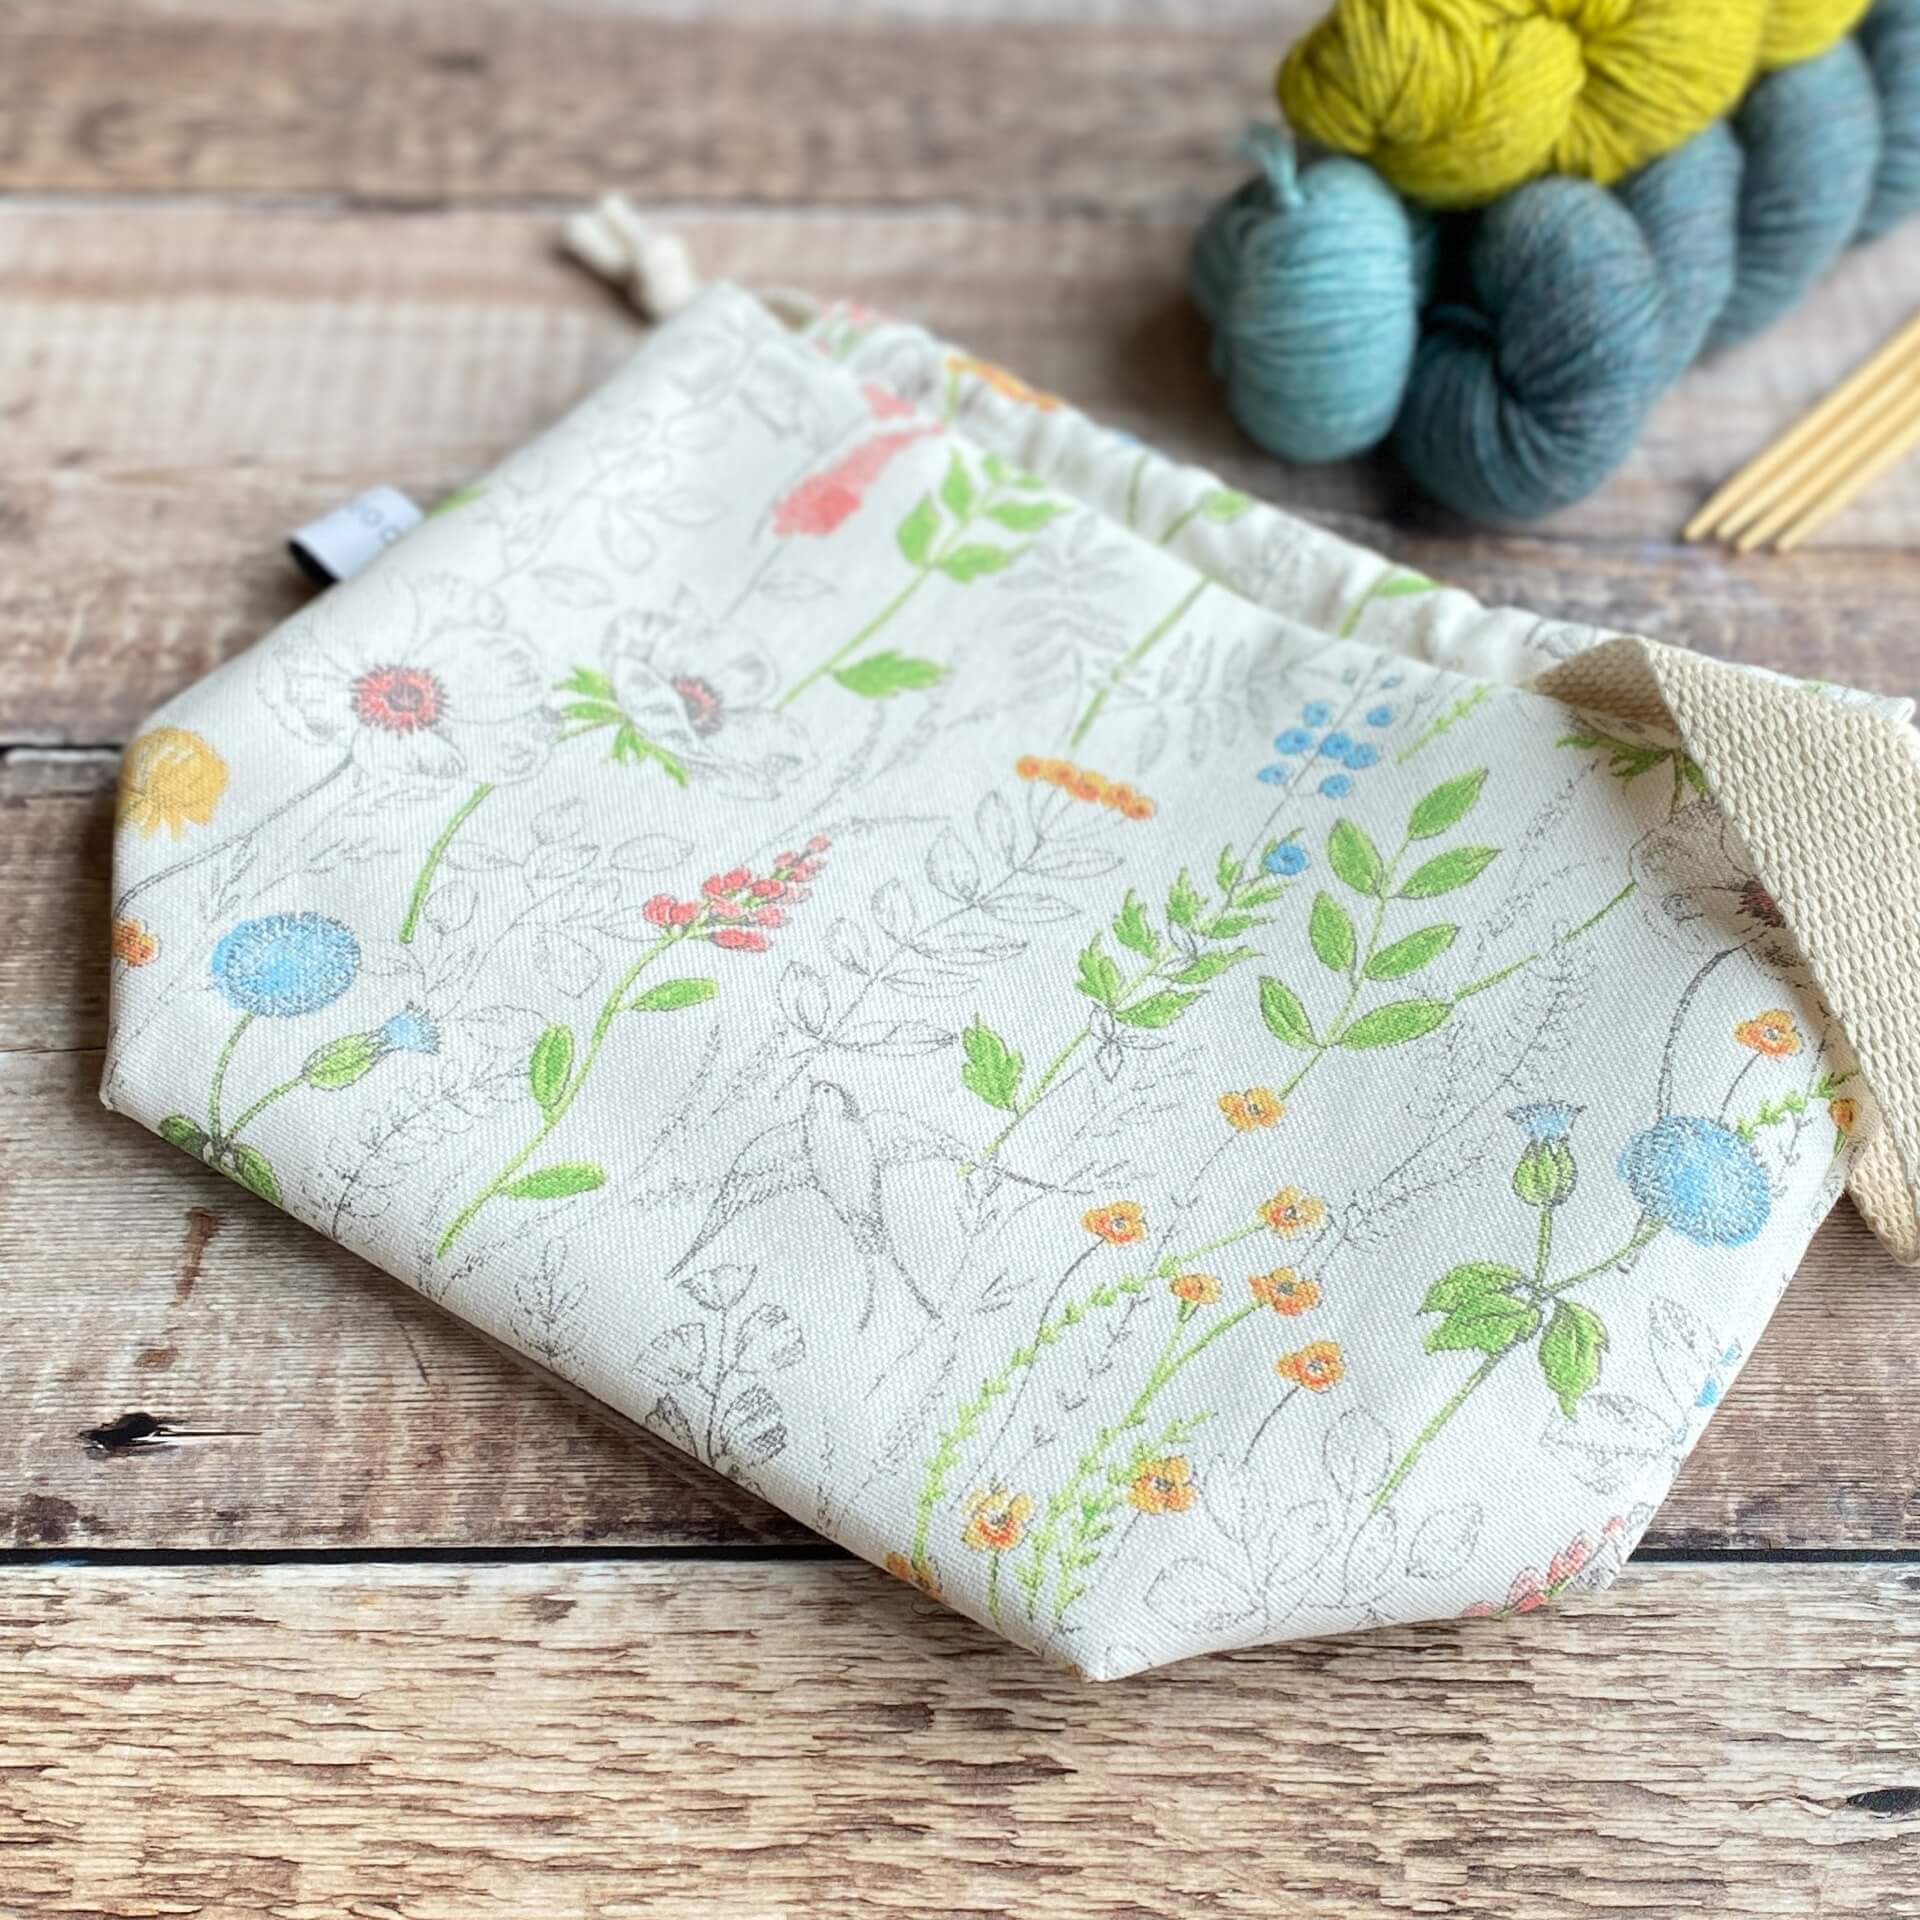 A knitting project bag lies flat on a wooden table with three skeins of yarn and some wooden knitting needles in the background. The bag is made from a print covered in wildflowers and a swallow can also be seen. 